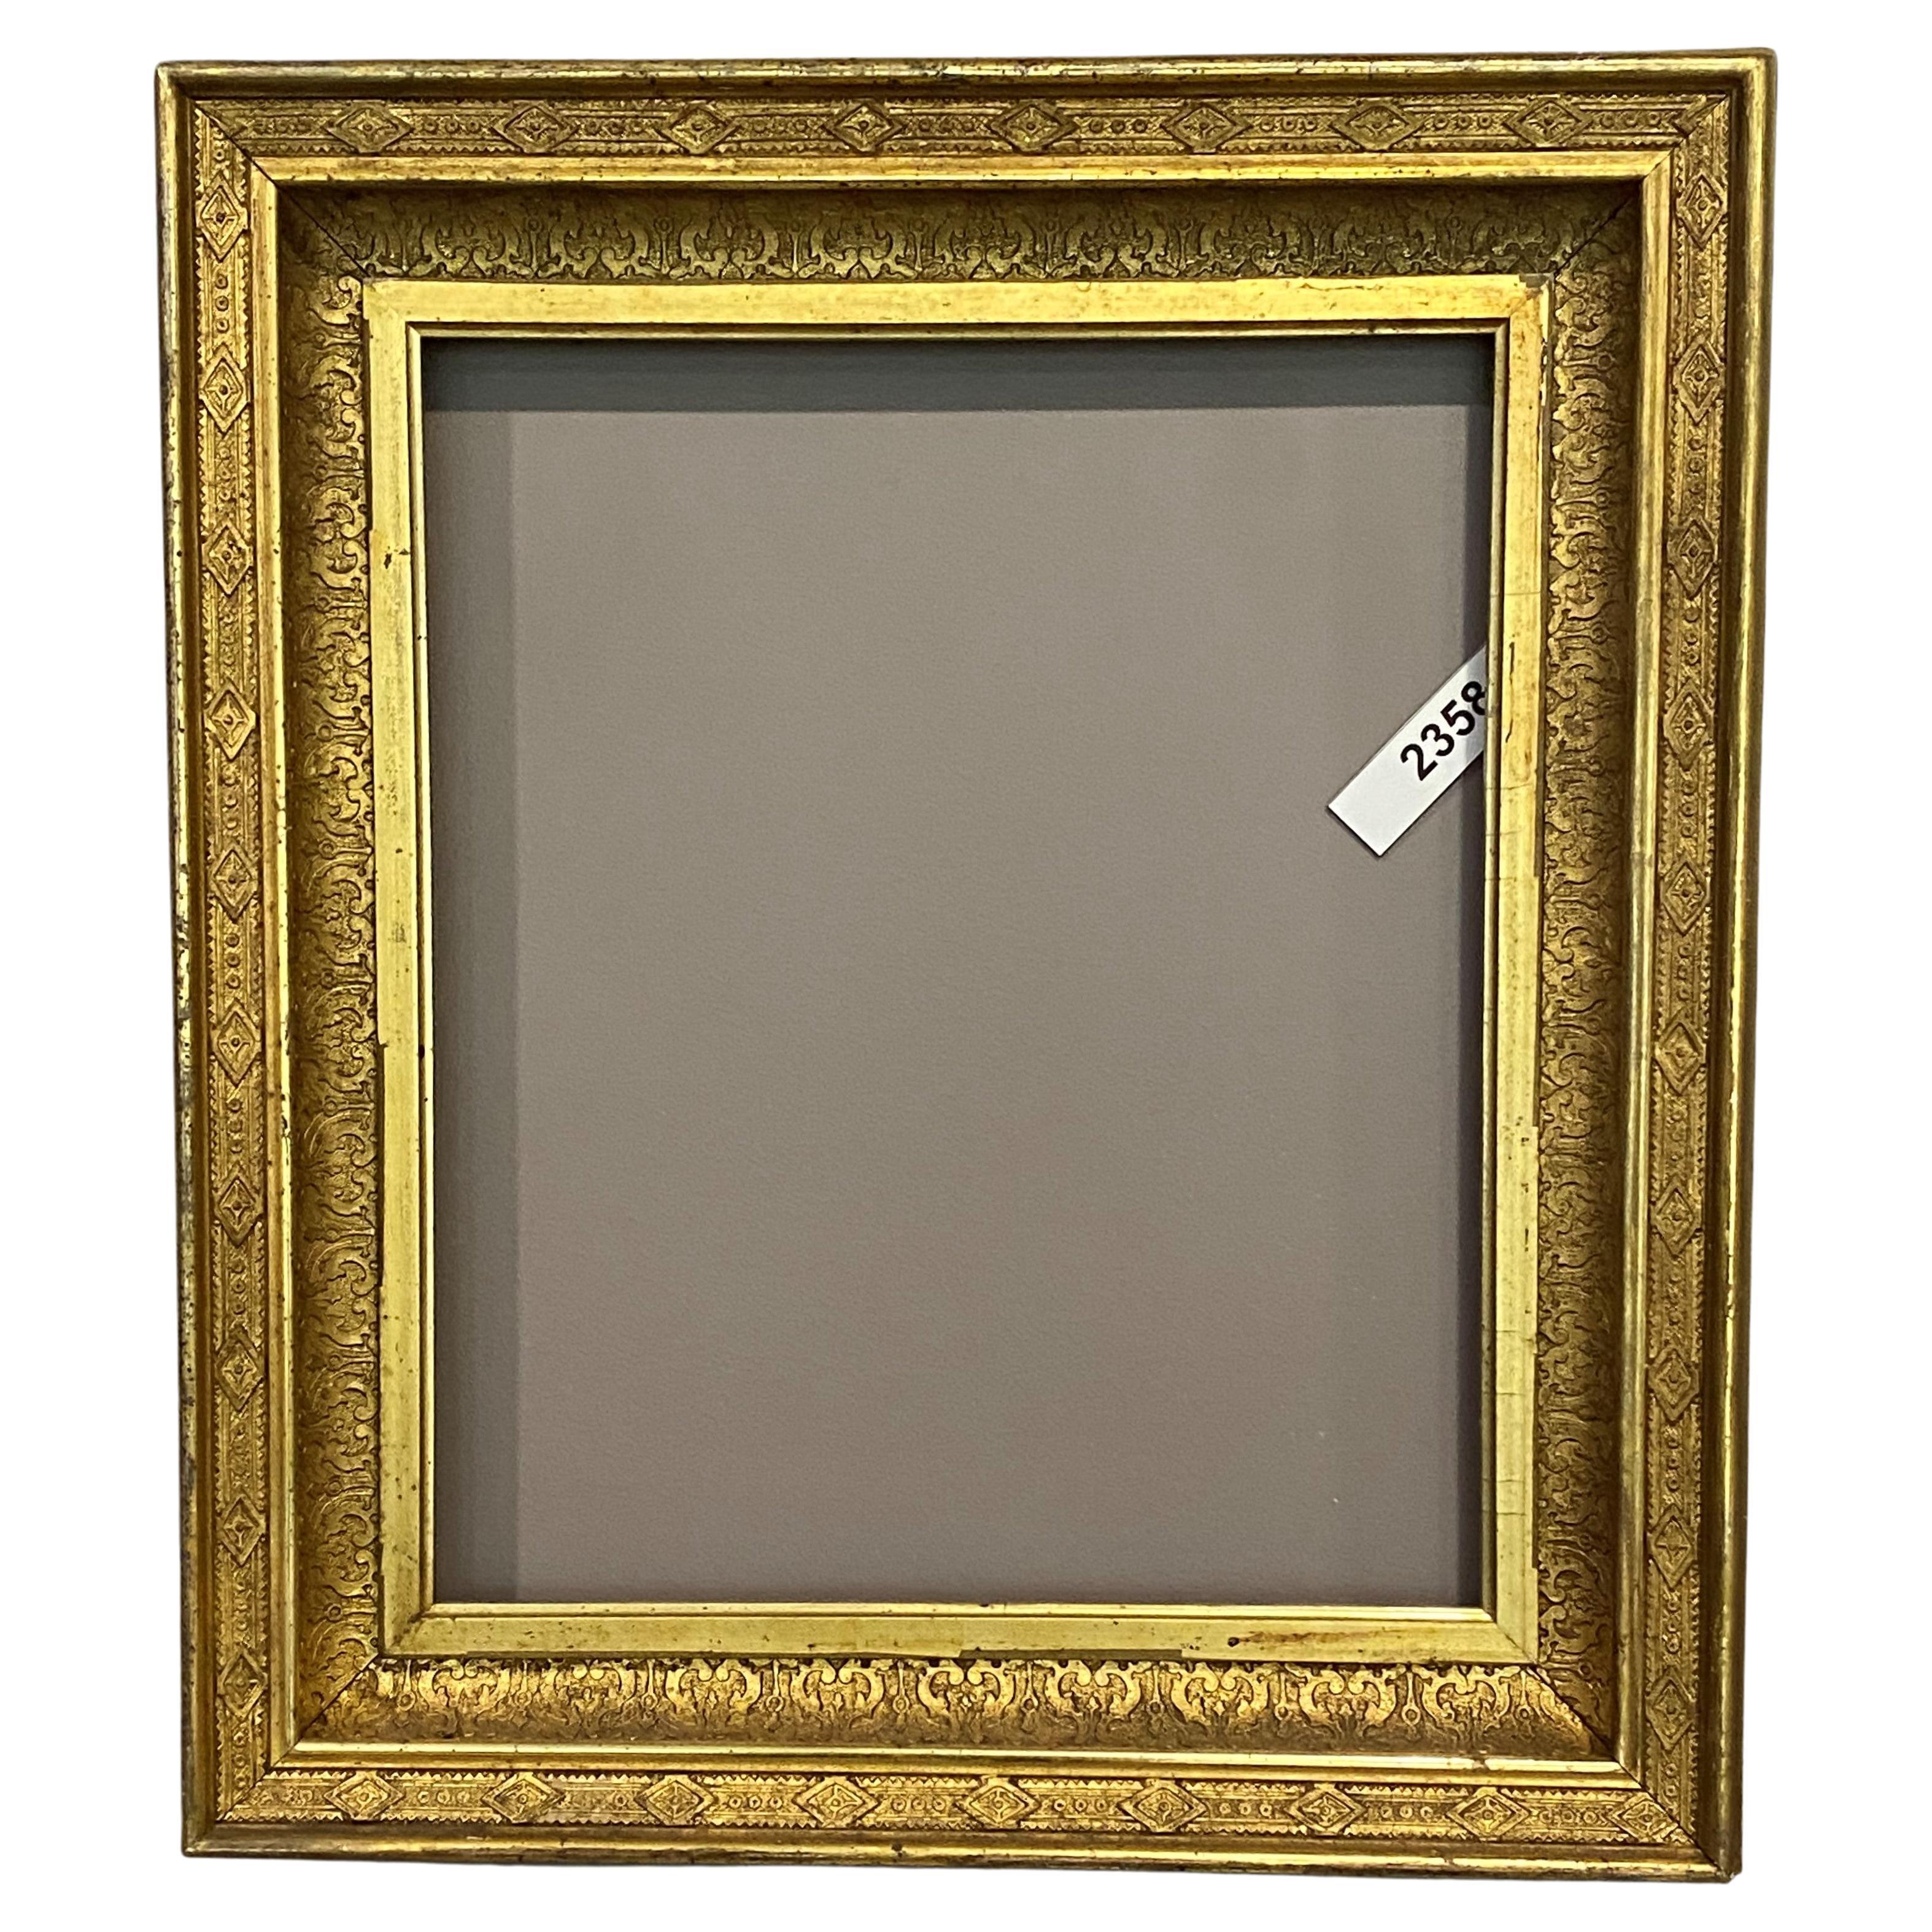 How do I know if my frame is gilded?